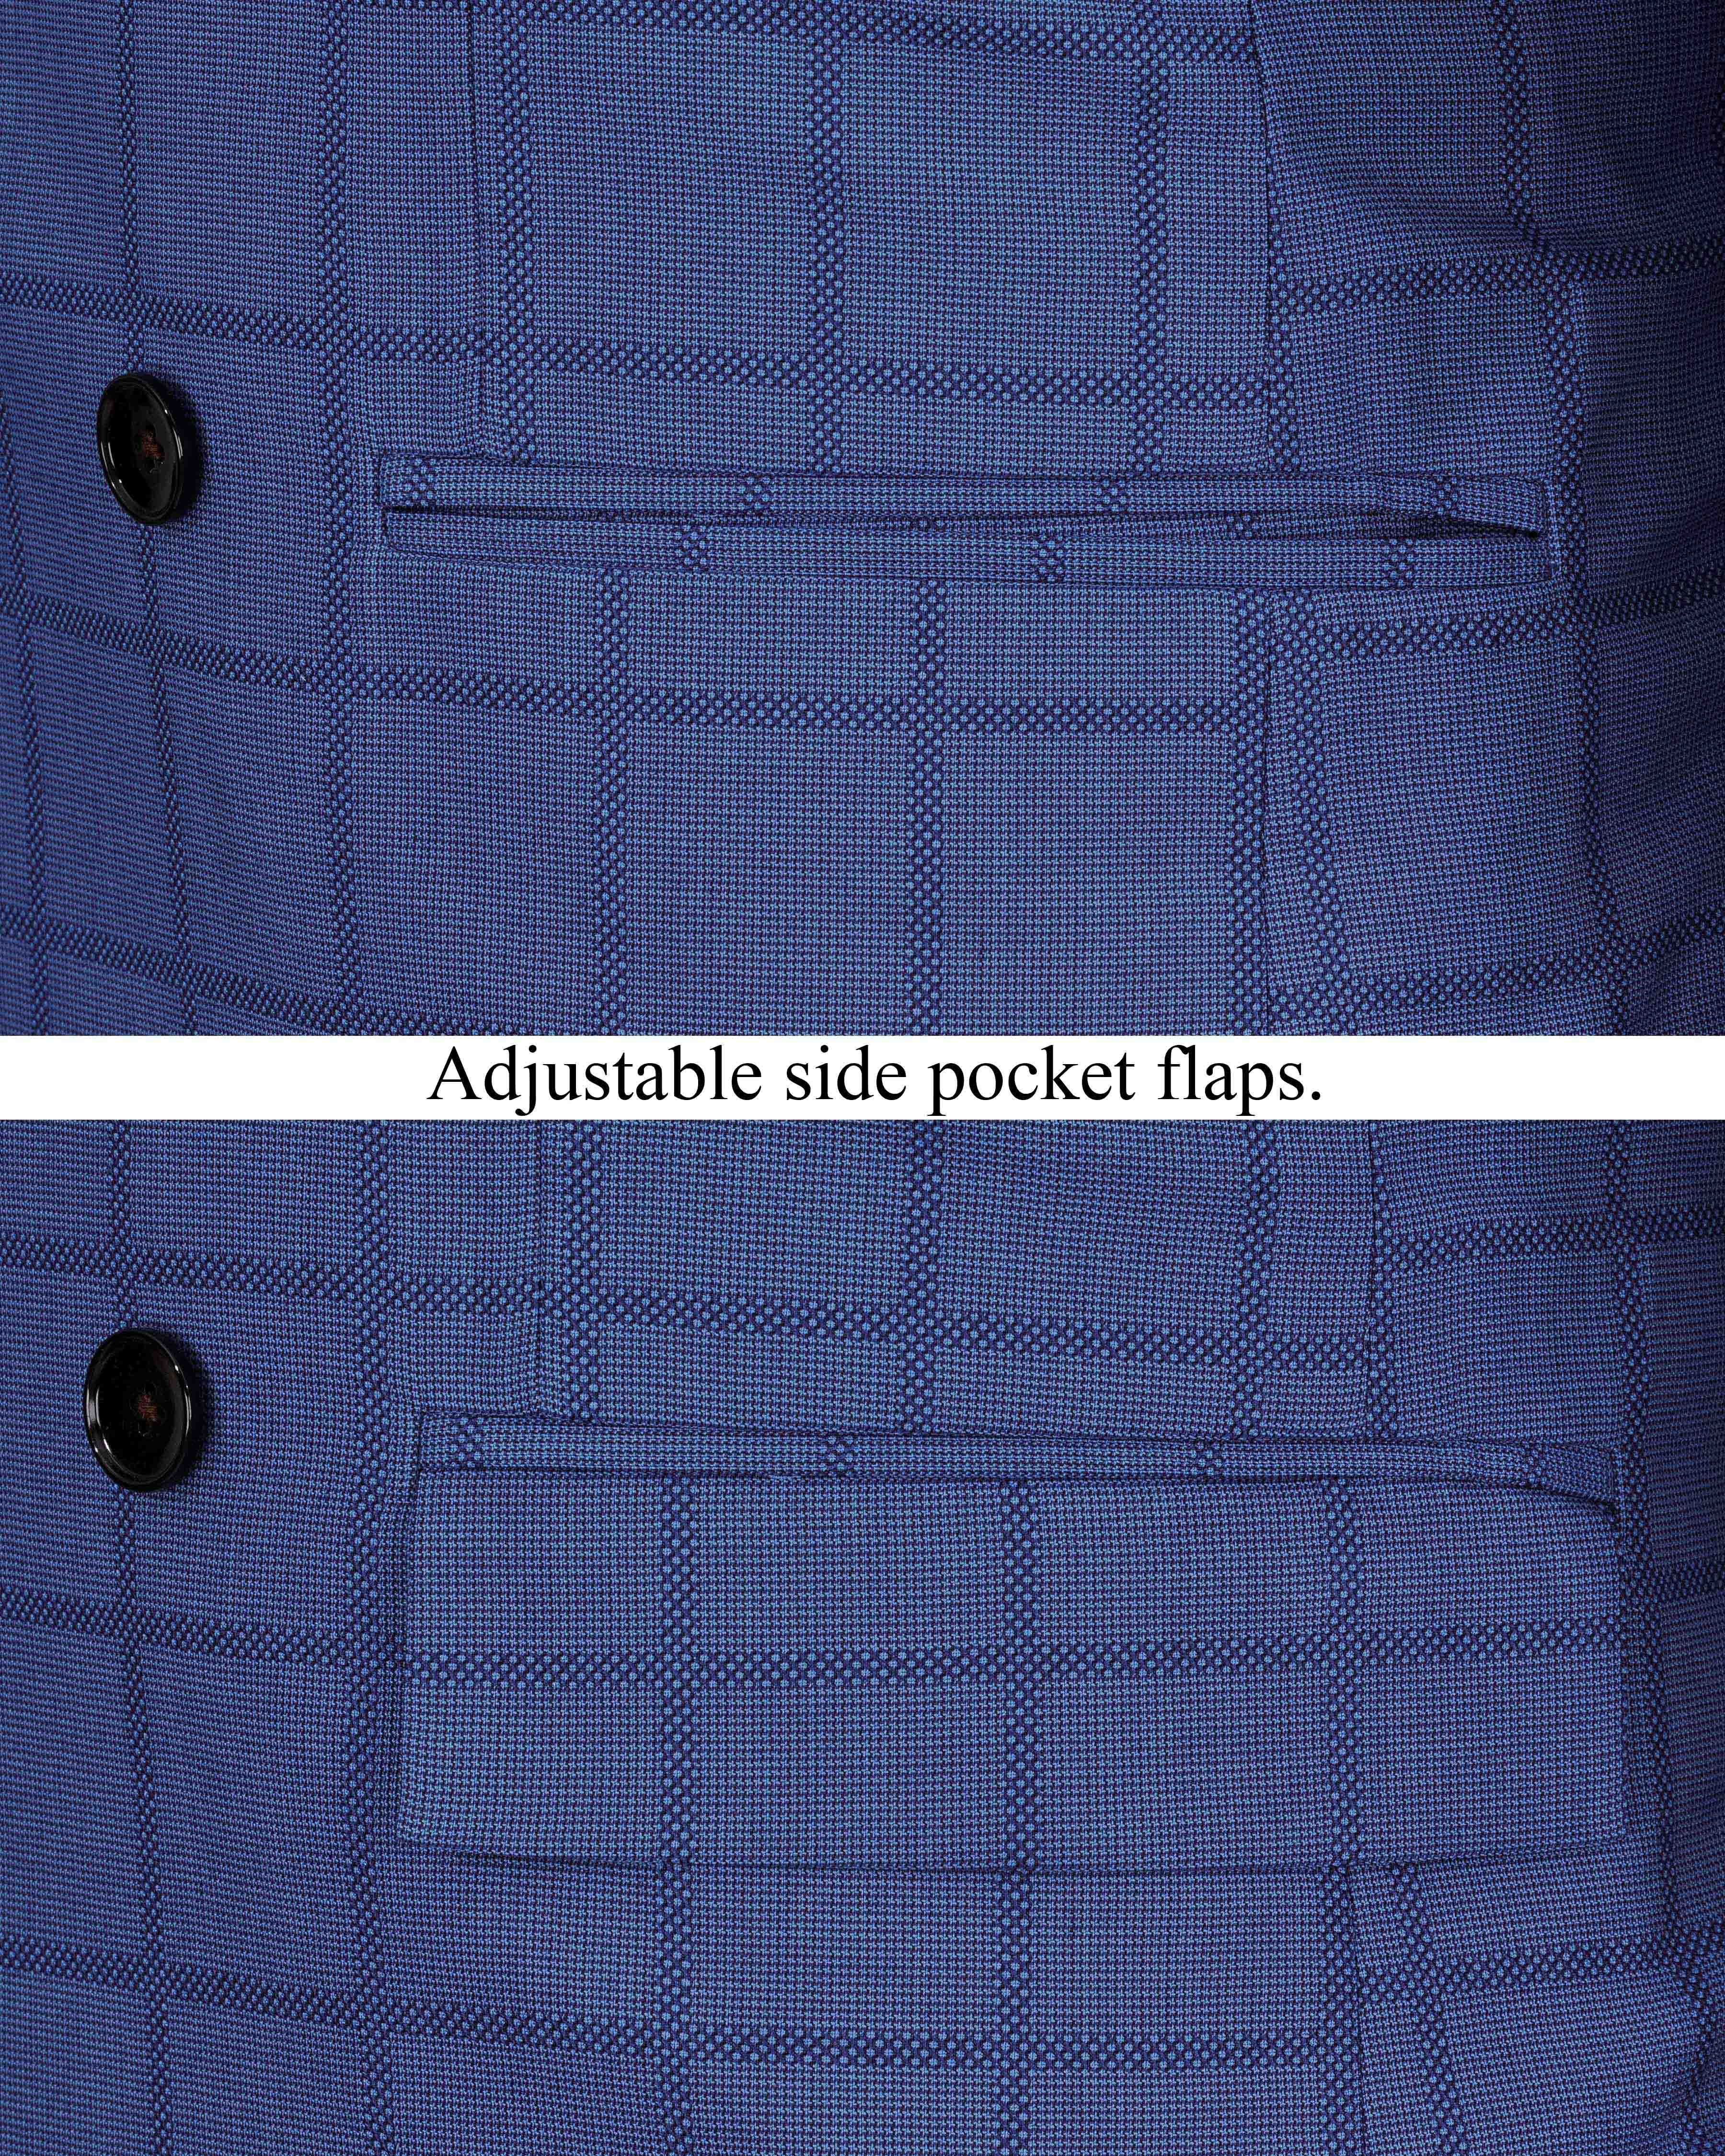 Chambray Blue Windowpane Double Breasted Blazer BL2048-DB-36, BL2048-DB-38, BL2048-DB-40, BL2048-DB-42, BL2048-DB-44, BL2048-DB-46, BL2048-DB-48, BL2048-DB-50, BL2048-DB-52, BL2048-DB-54, BL2048-DB-56, BL2048-DB-58, BL2048-DB-60